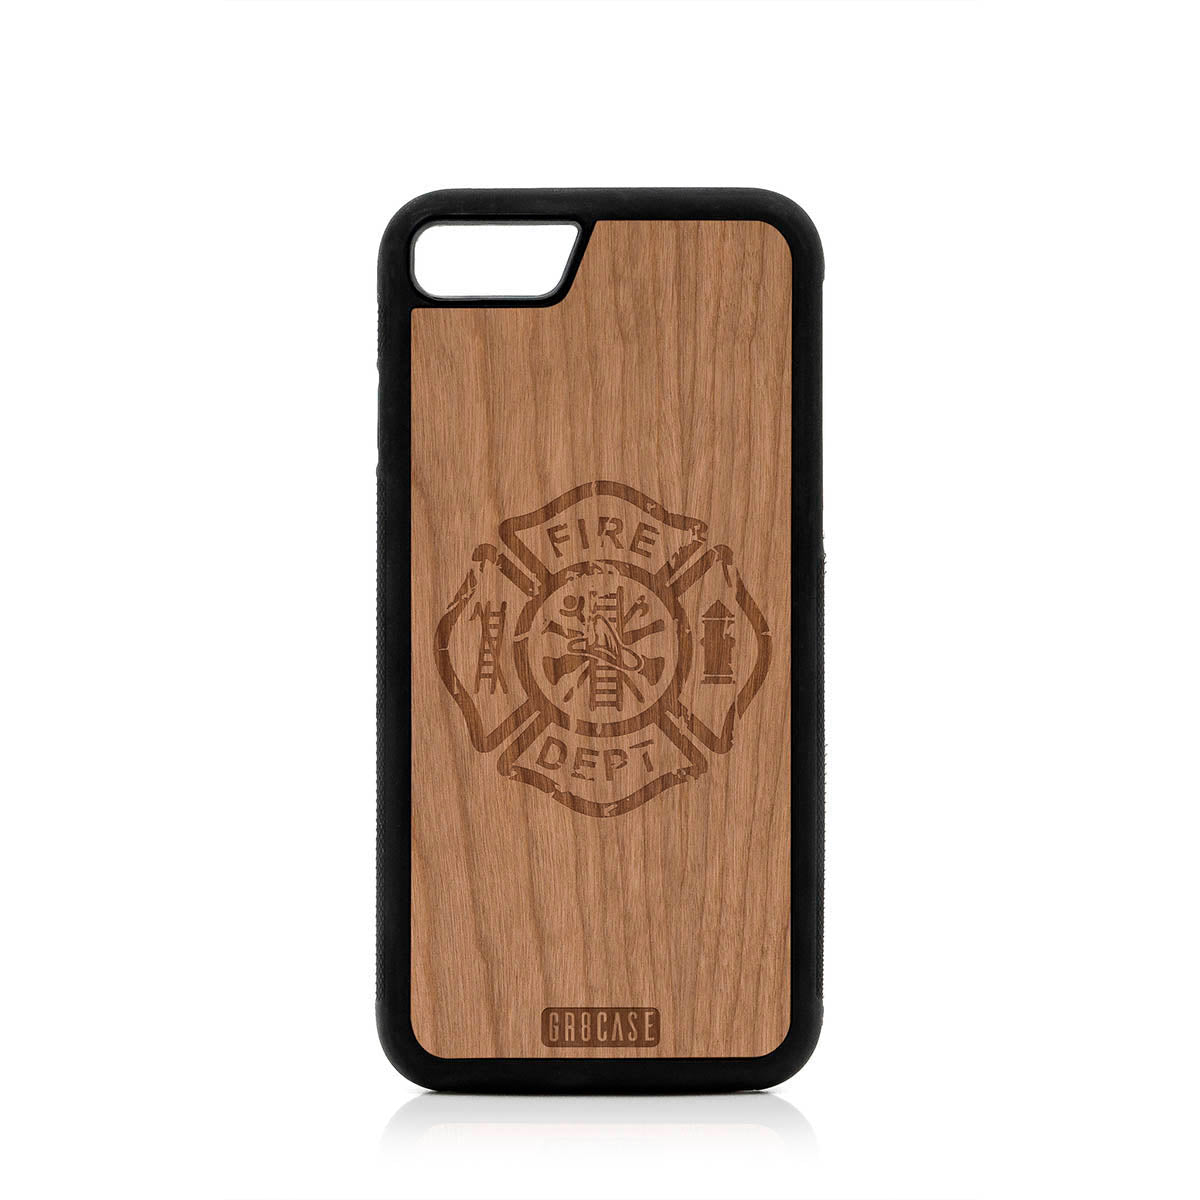 Fire Department Design Wood Case For iPhone 7/8 by GR8CASE